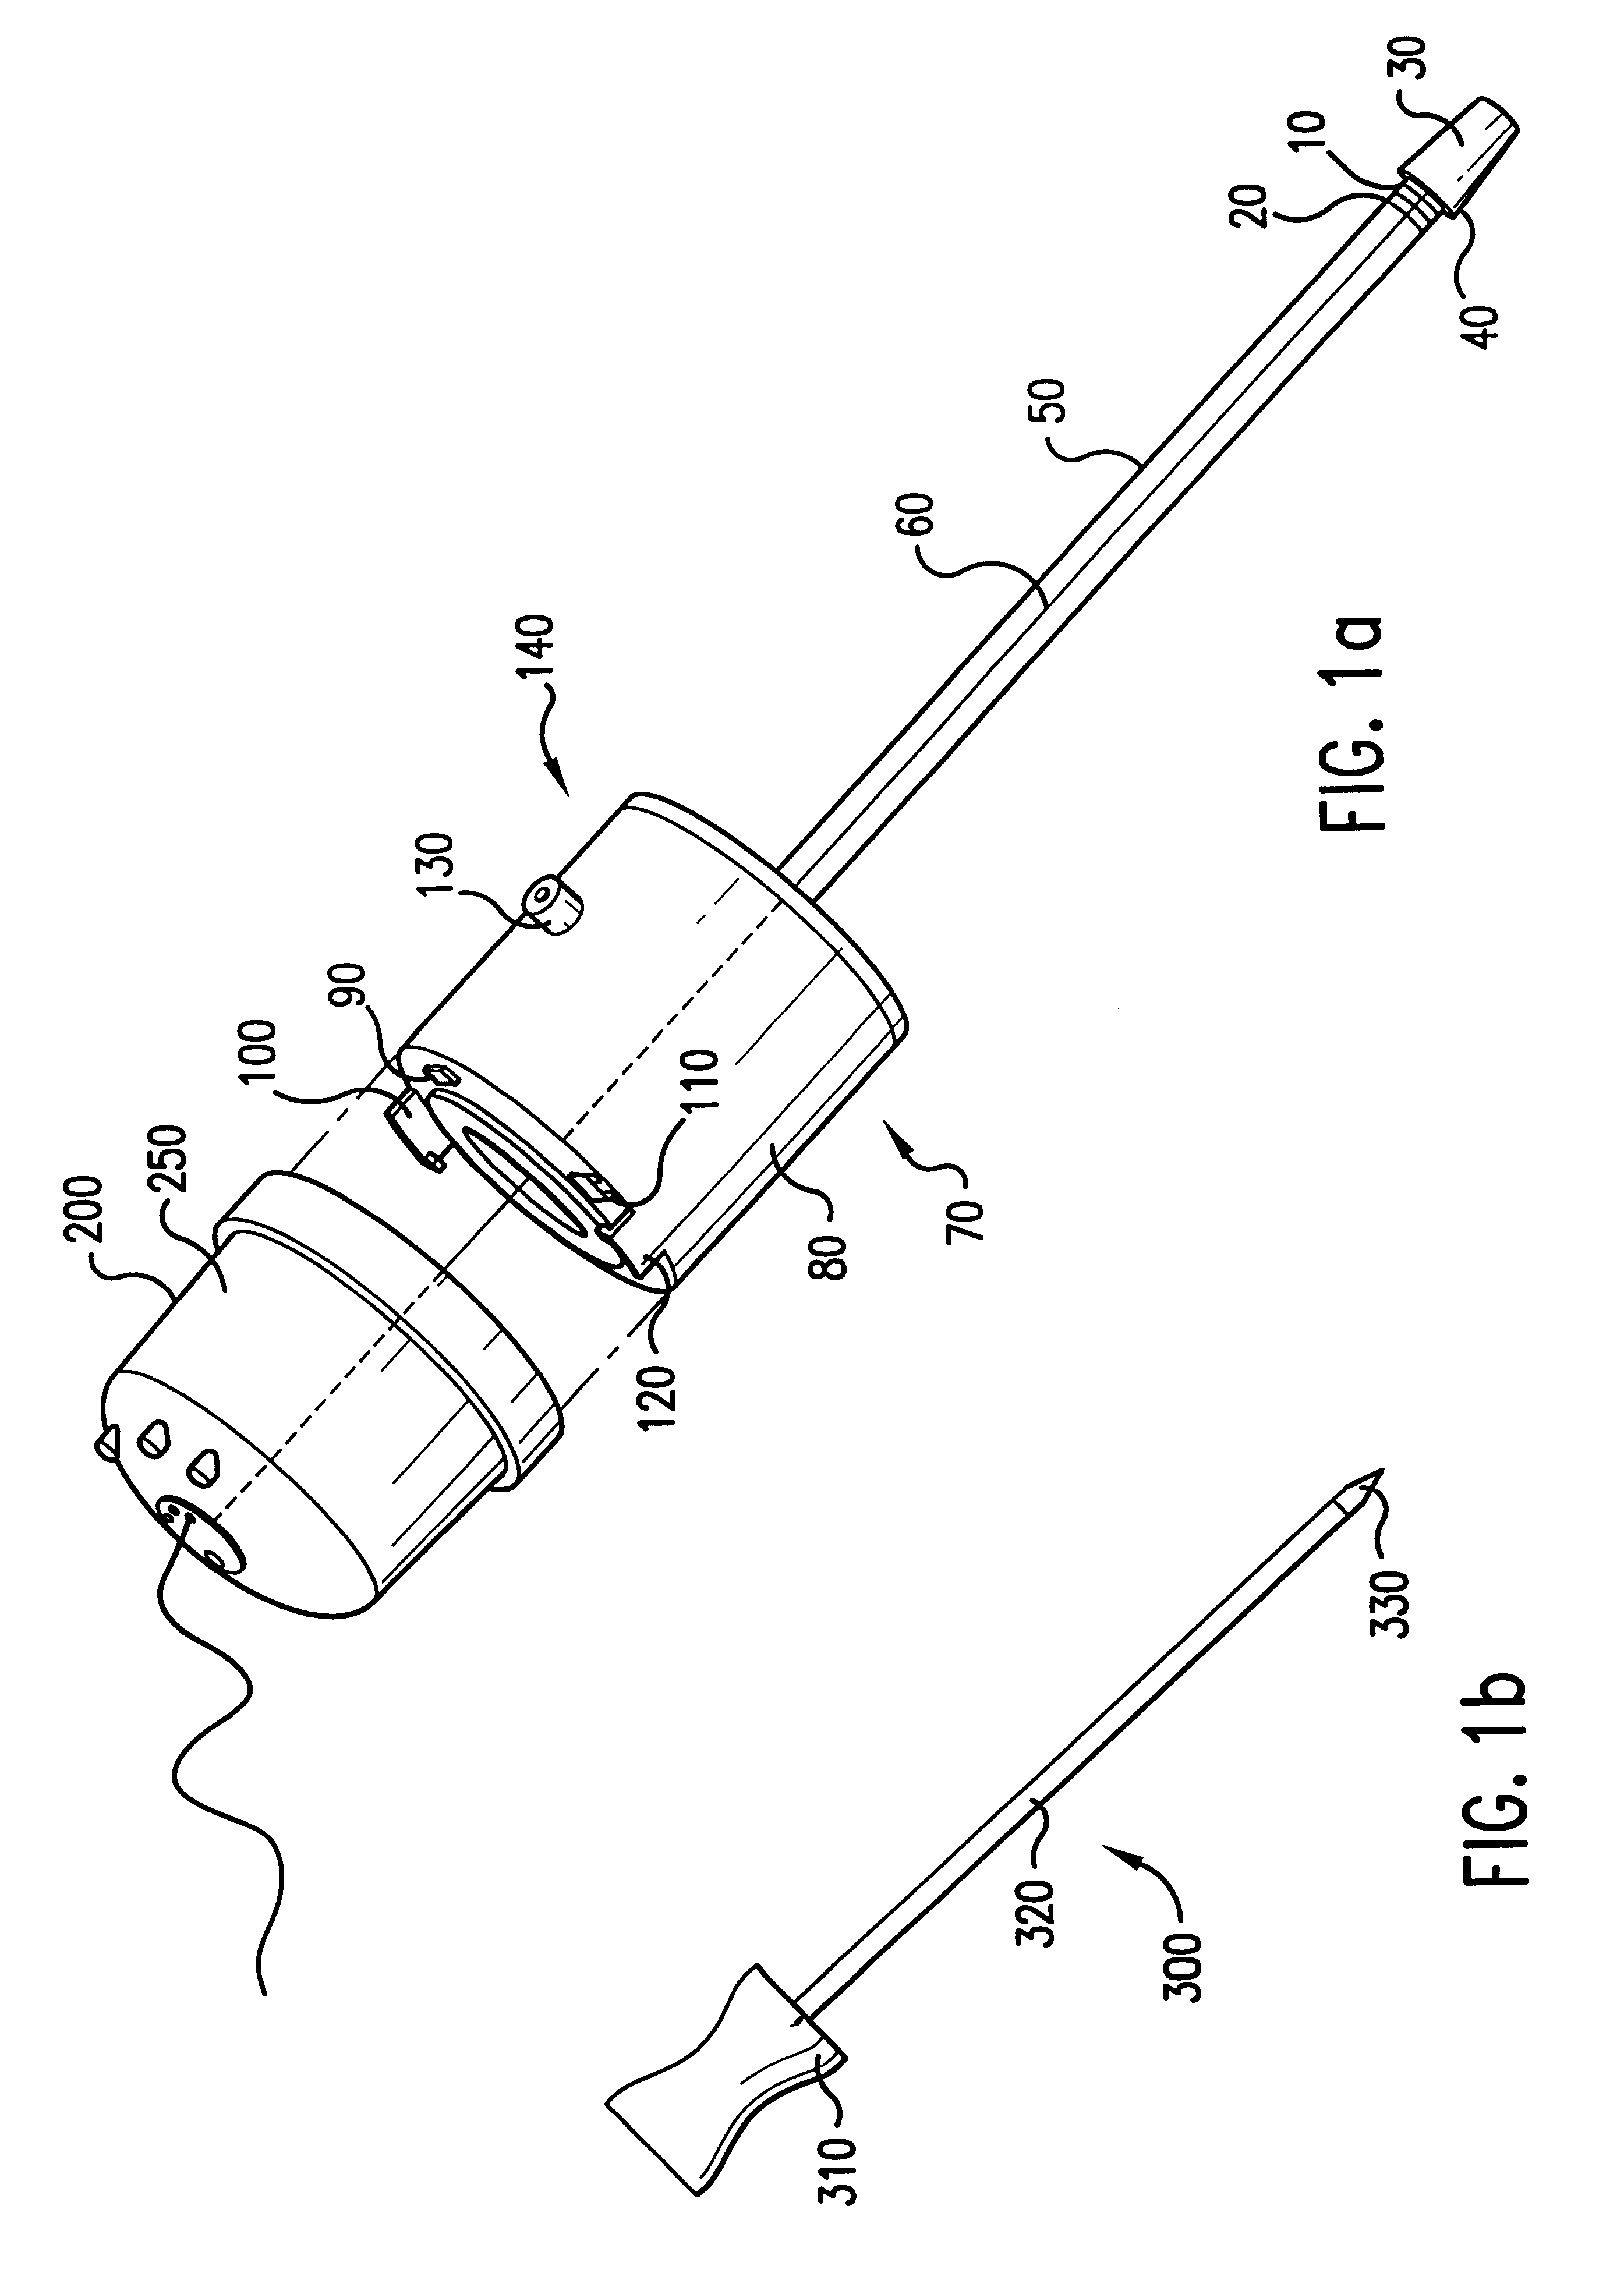 Systems and methods for reducing post-surgical complications